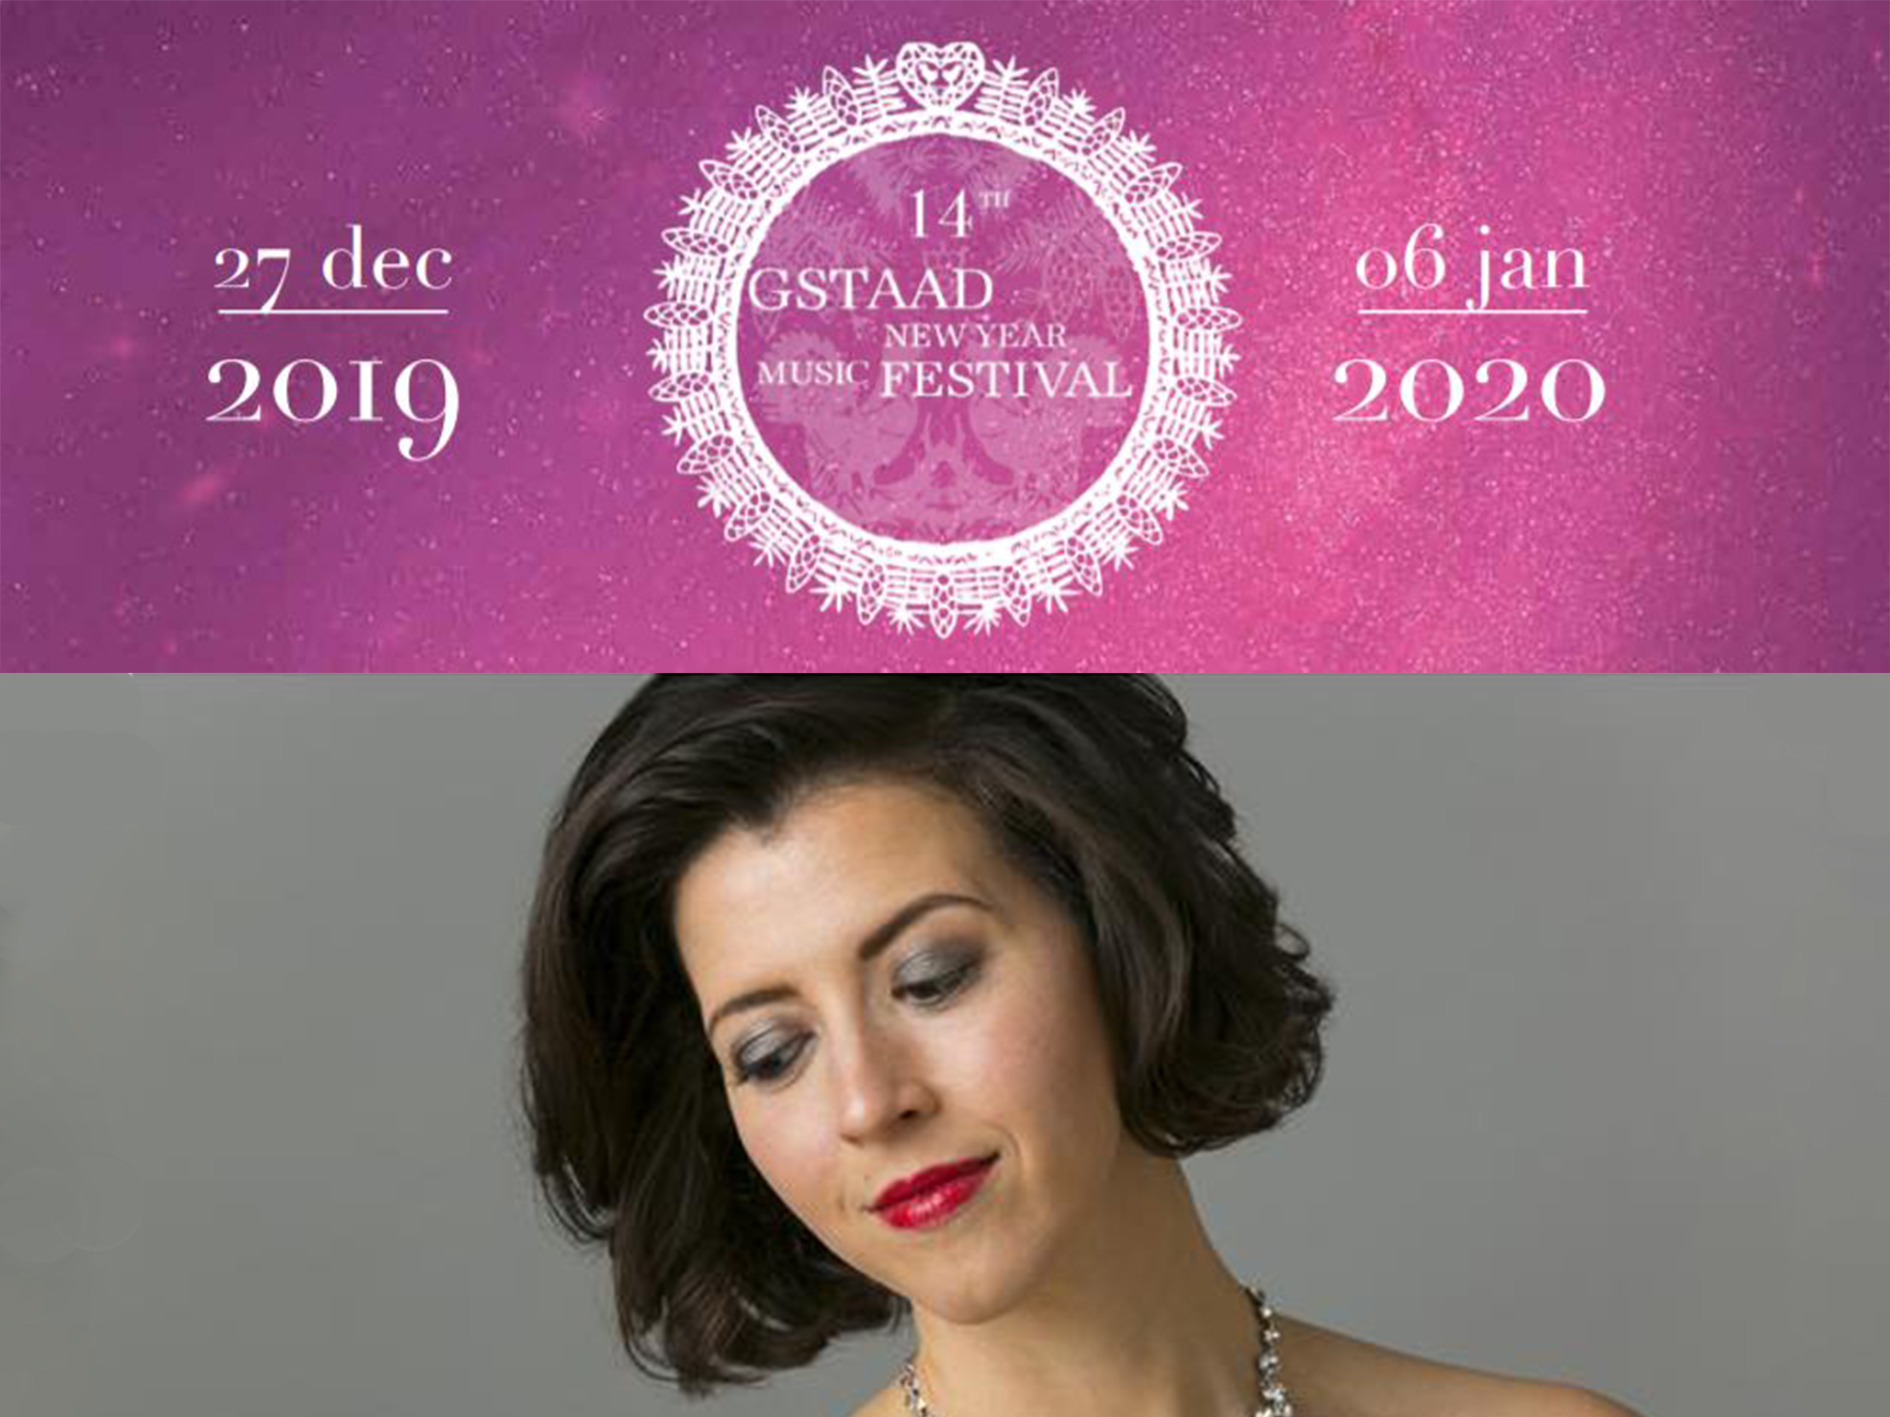 Concert Lisette Oropesa - Gstaad New Year music festival (2020) (Production  - Lauenen , switzerland) | Opera Online - The opera lovers web site